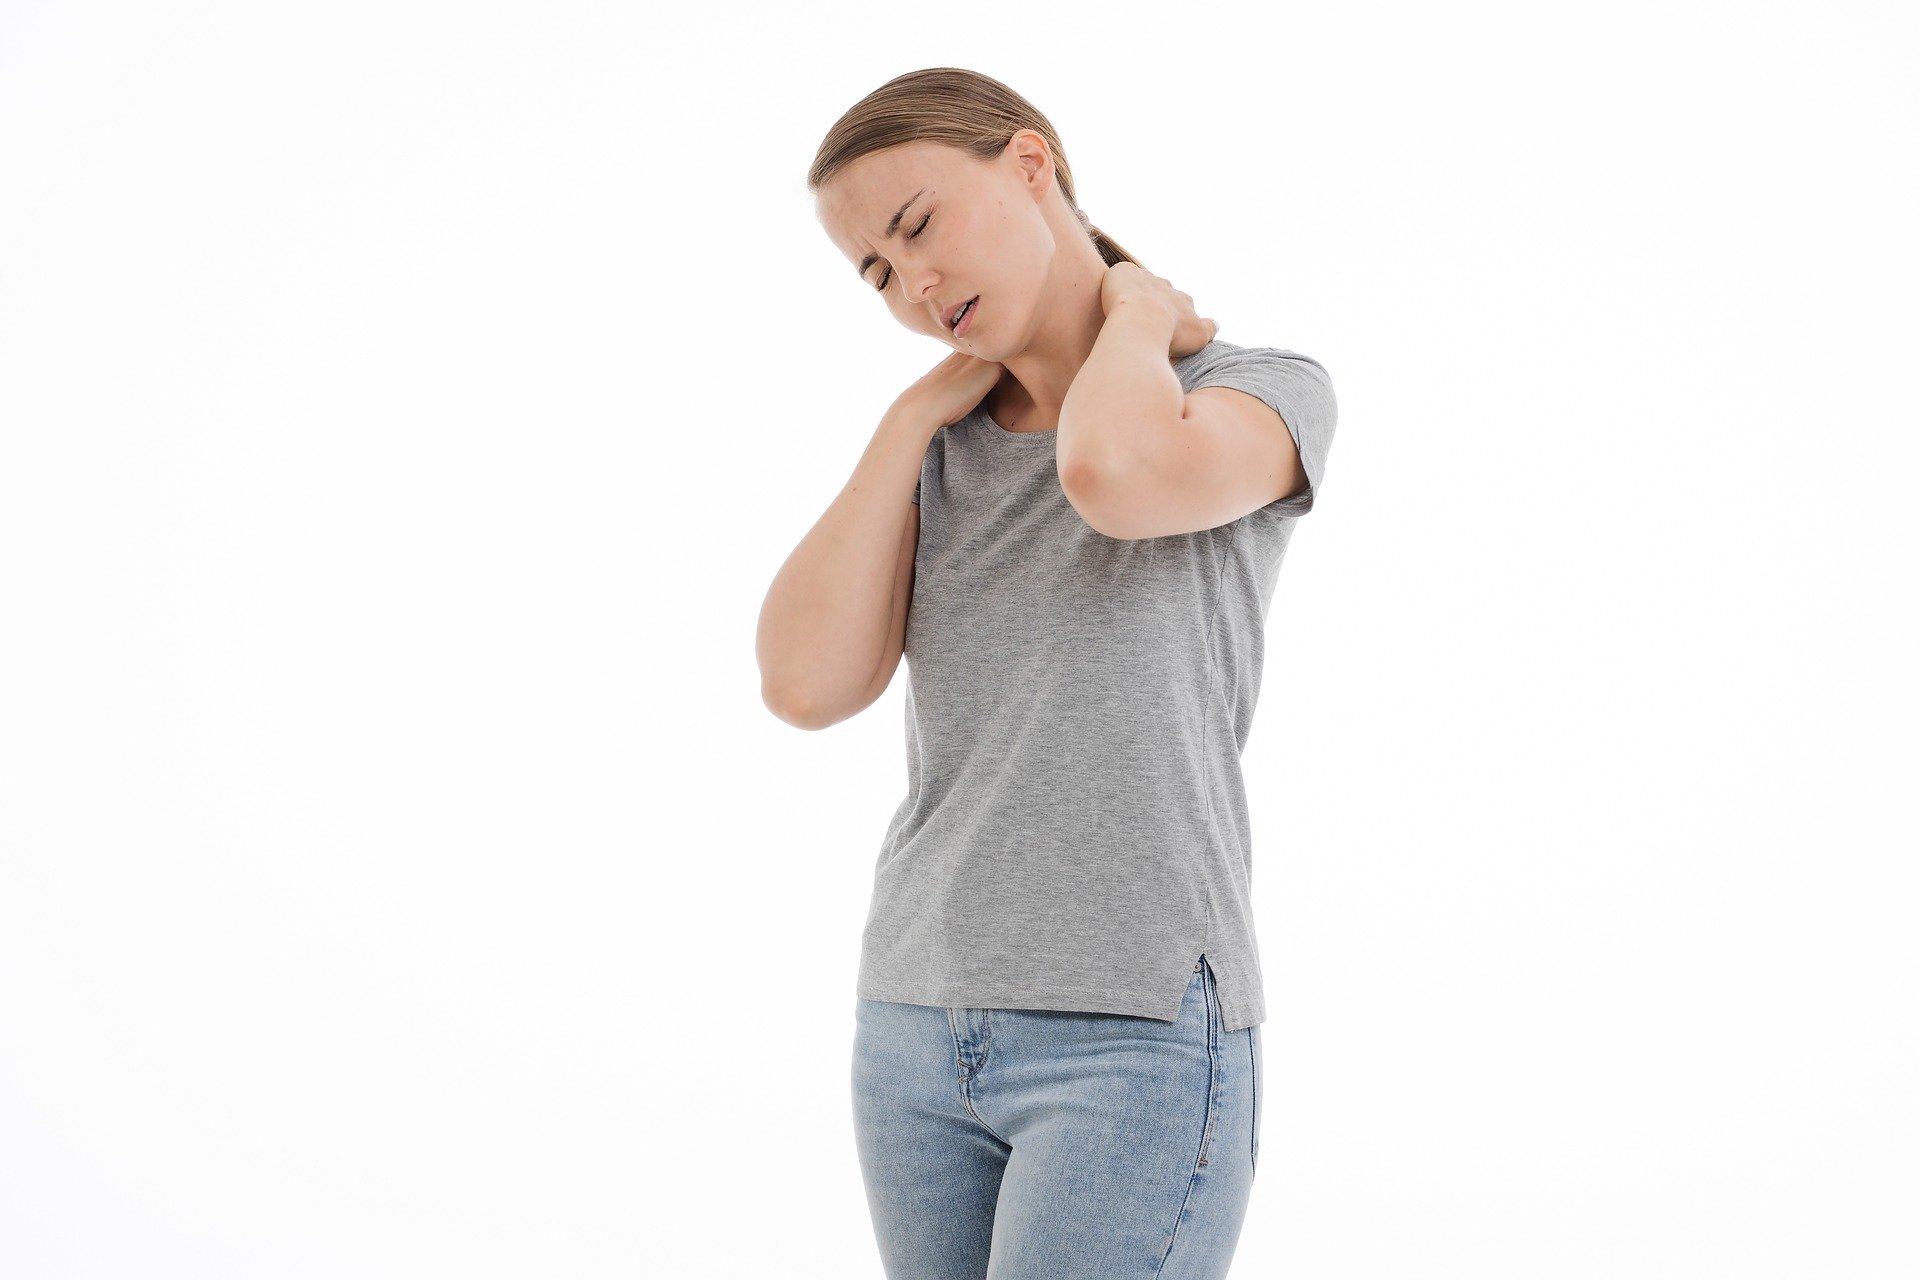 when correcting posture causes pain